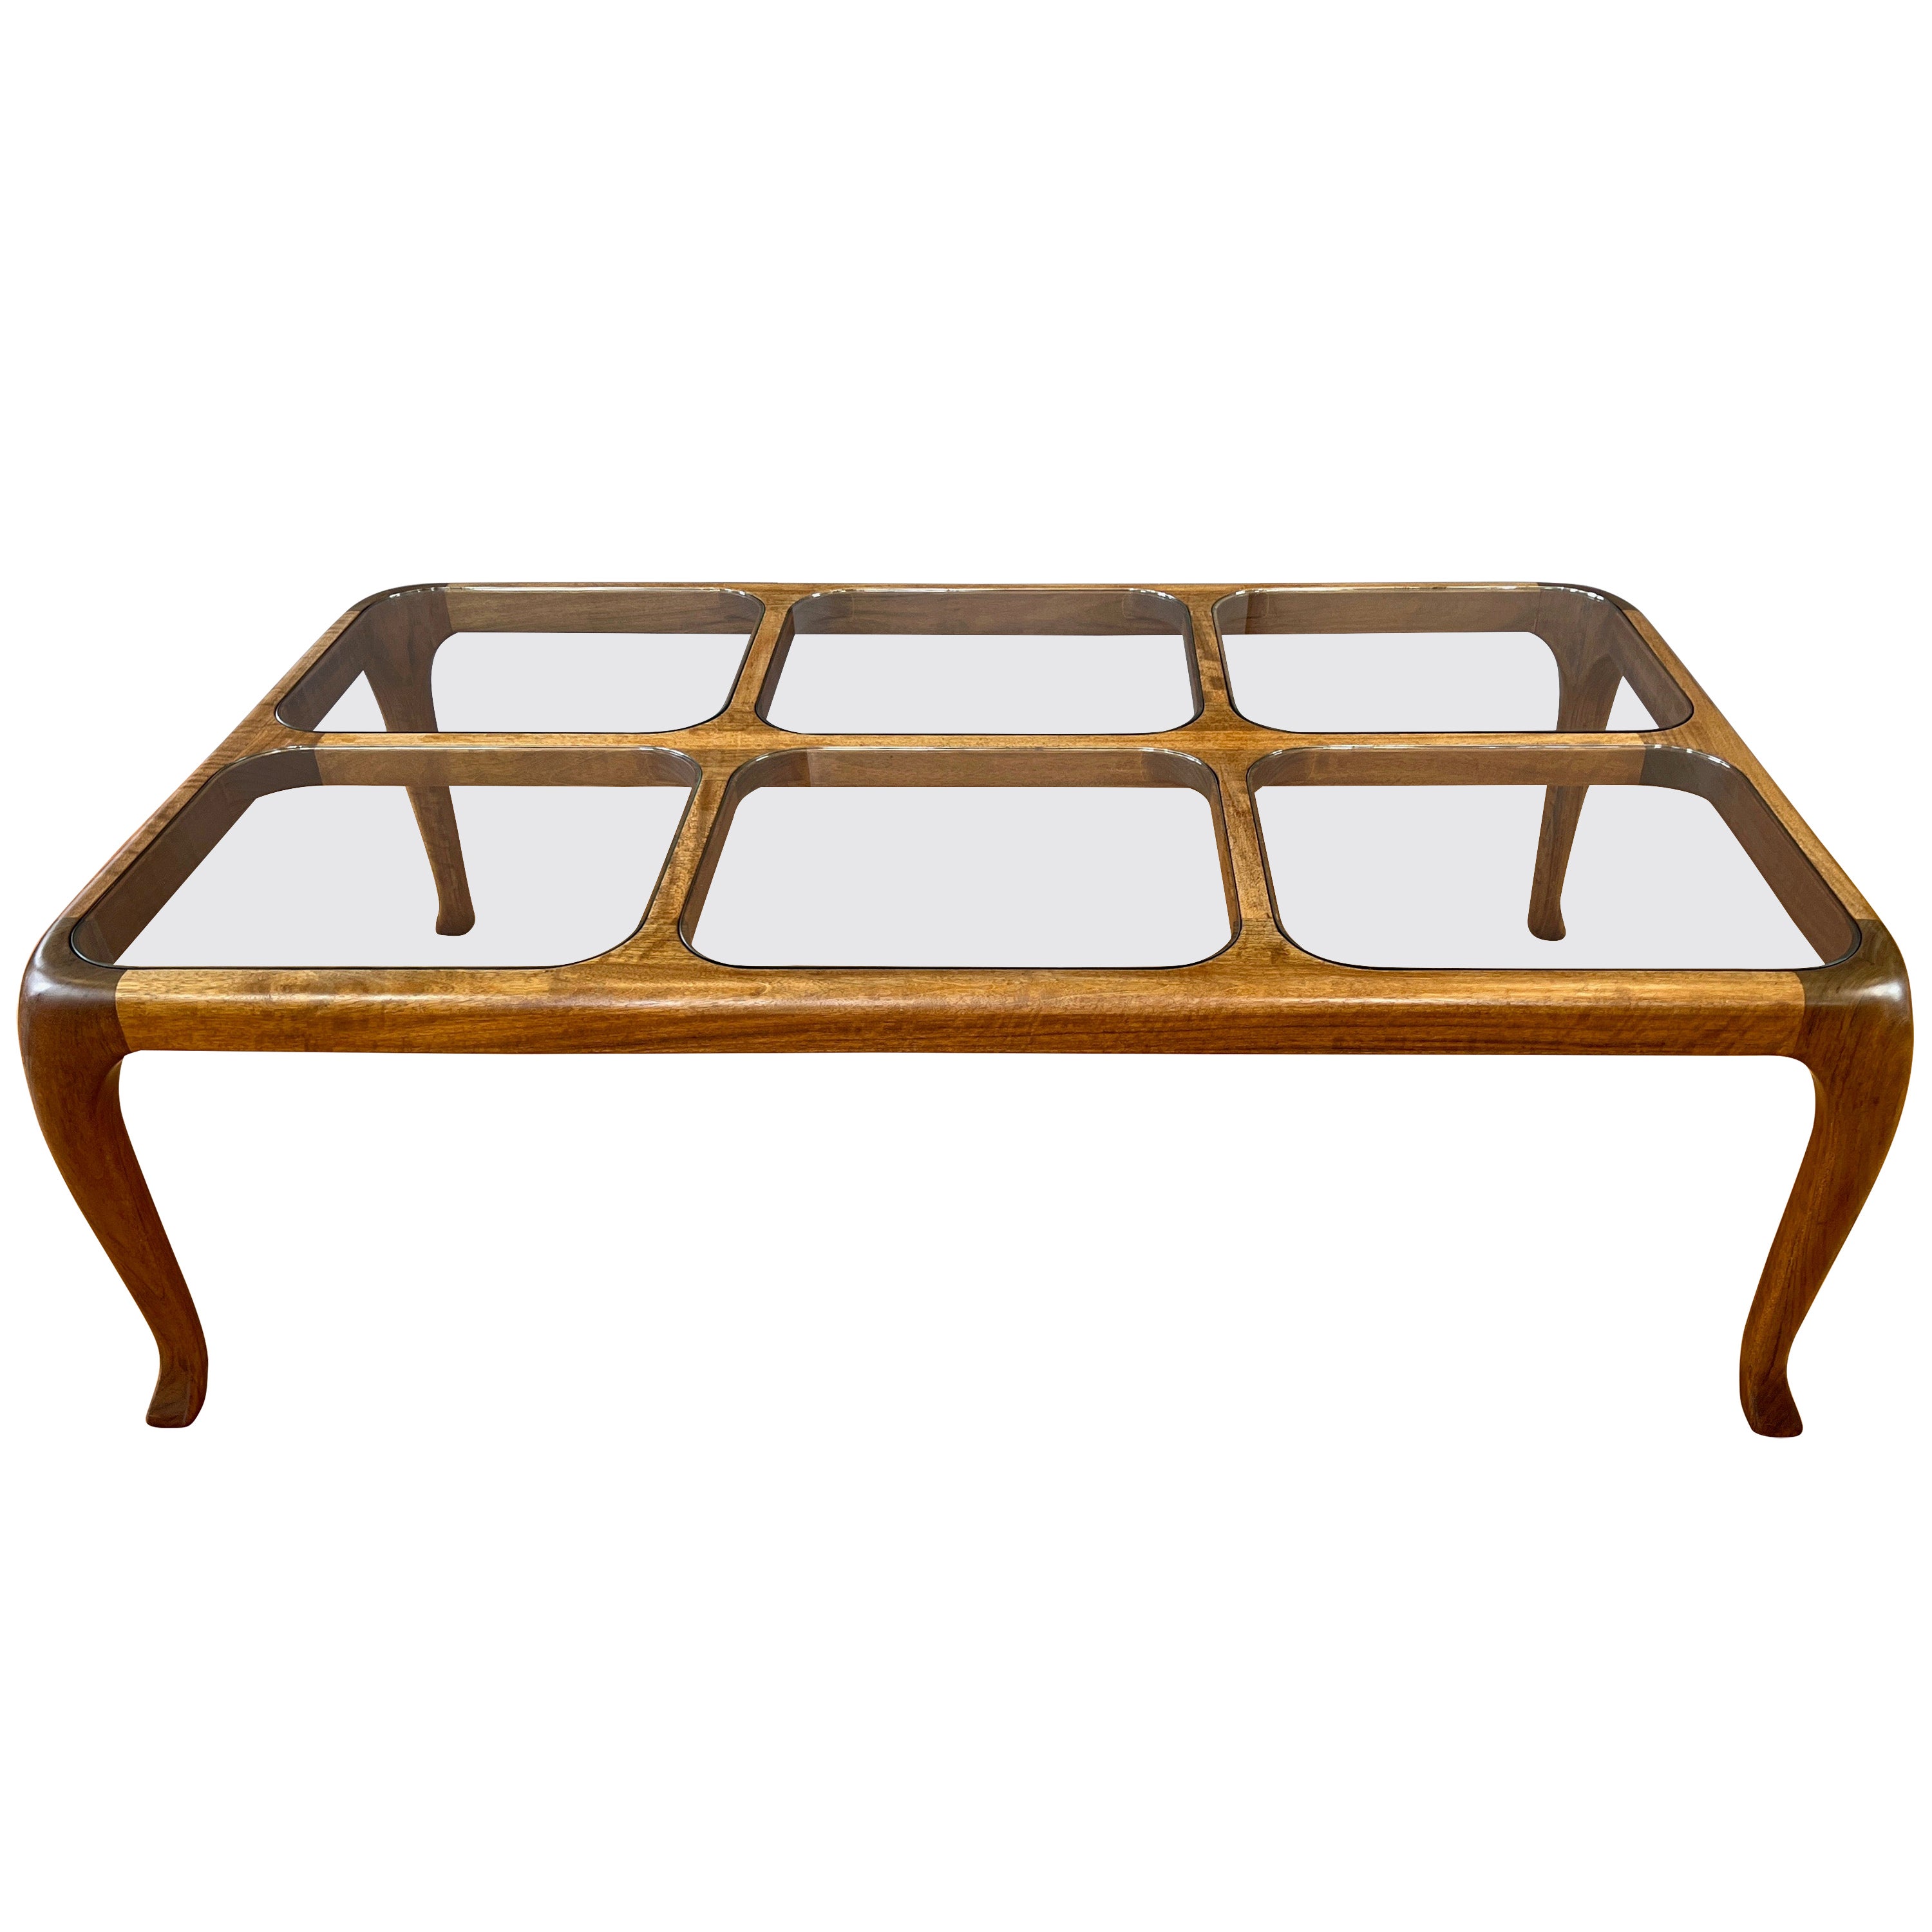 Thomas Saydah Large Walnut and Glass Coffee Table, Signed and Dated, 1982